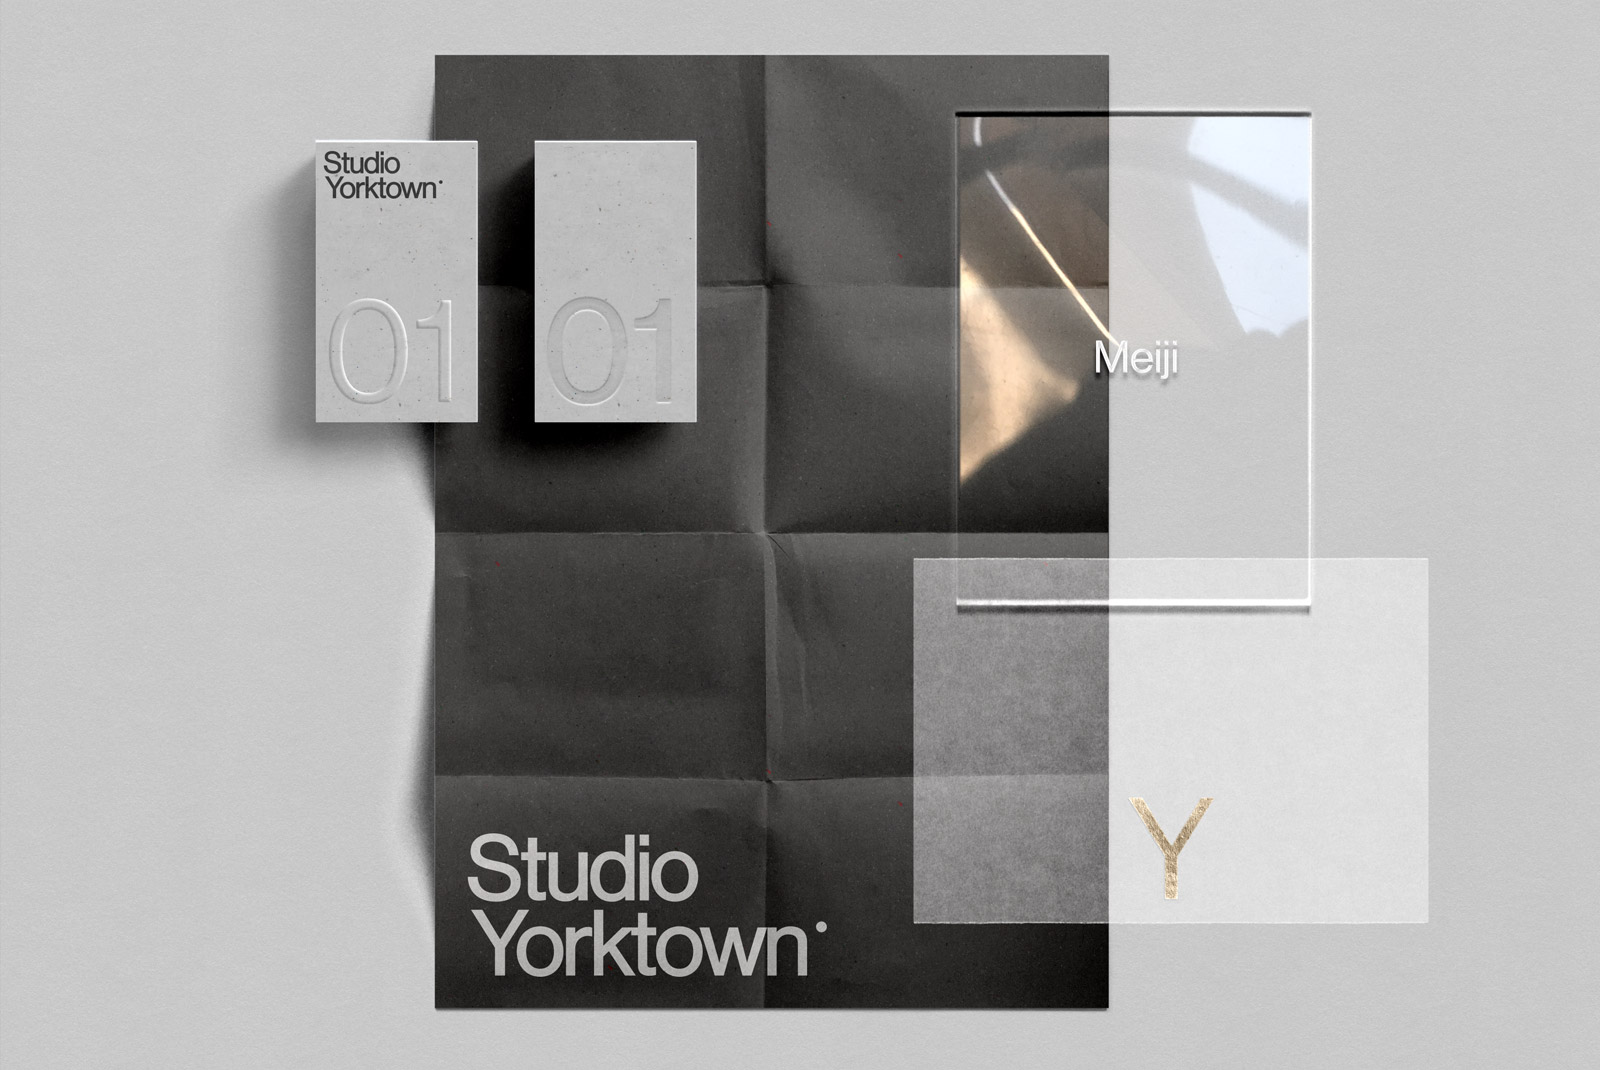 Stylish stationery mockup with business cards and textured papers displaying Studio Yorktown brand, ideal for design presentations.